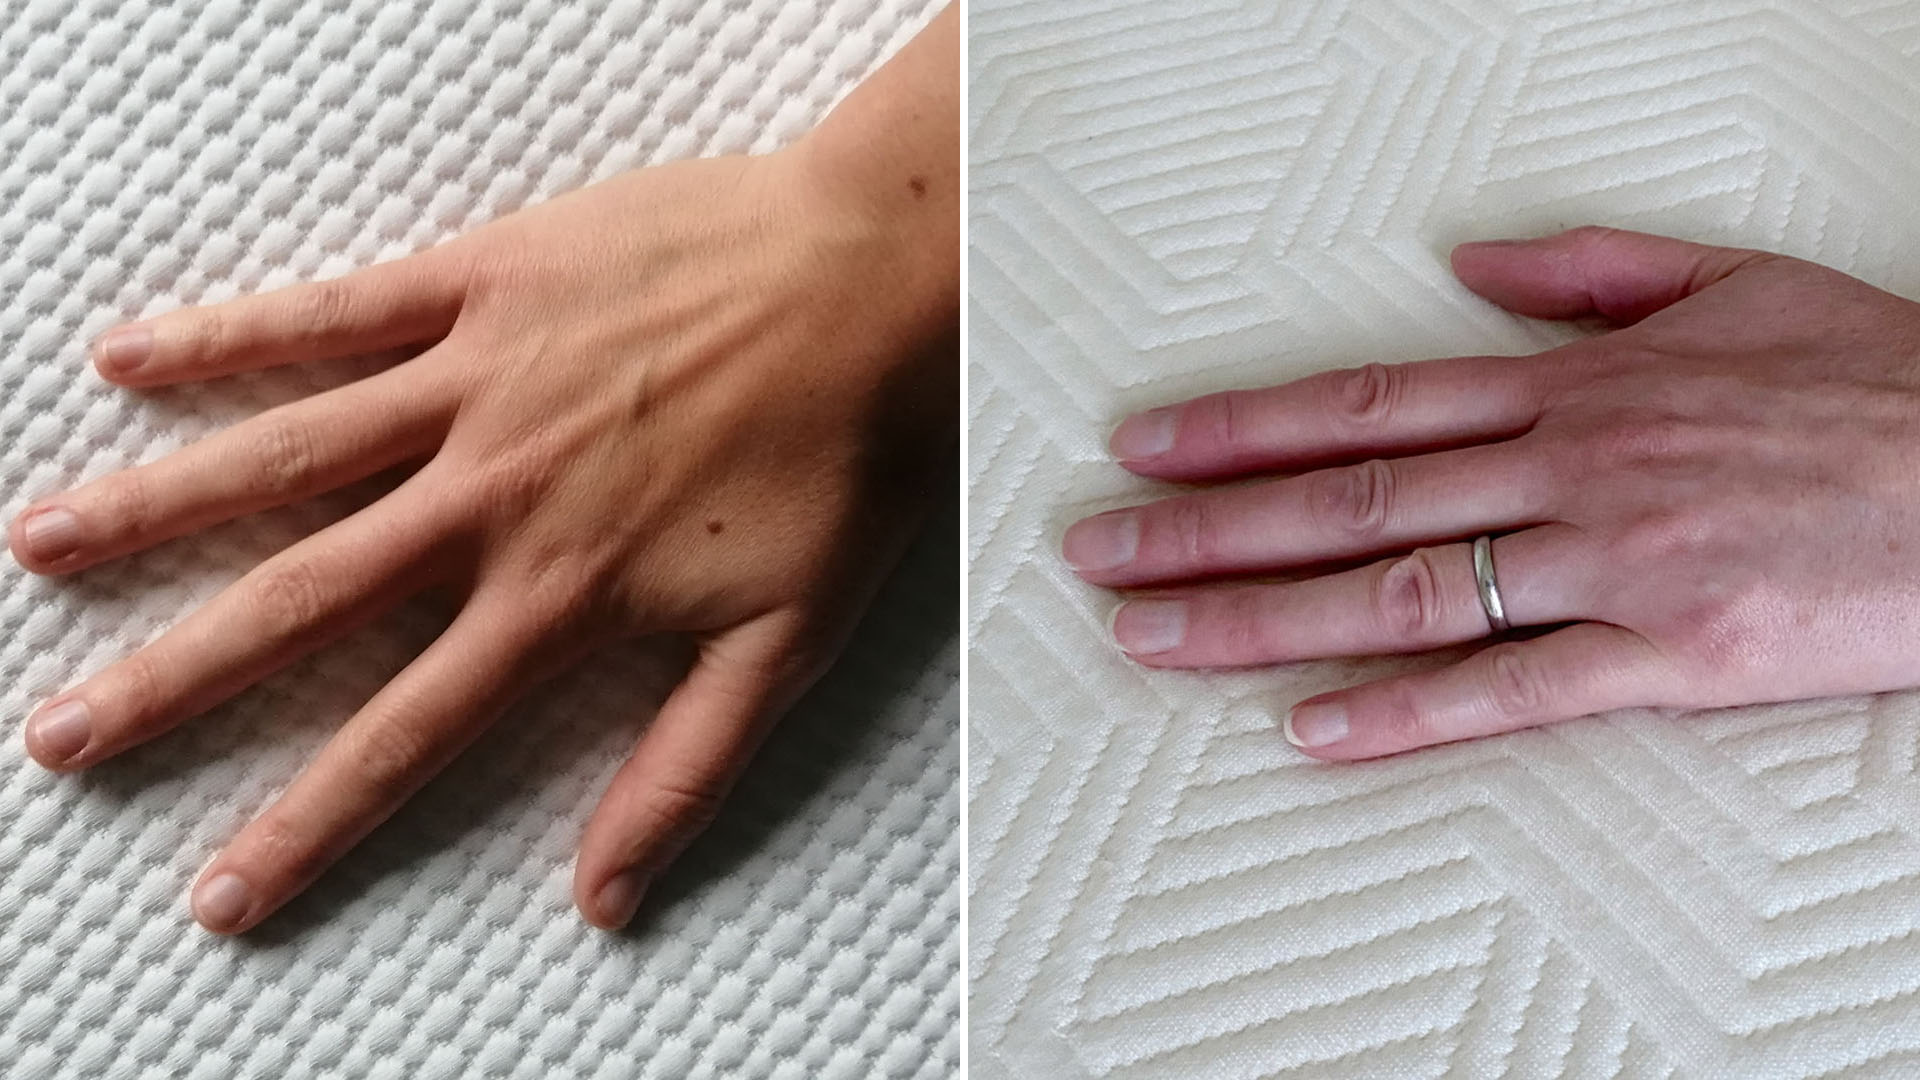 A close-up of.a hand touching the surface of the Simba Hybrid Pro mattress (left) vs a closeup of a hand touching the Panda Bamboo Hybrid mattress (right)